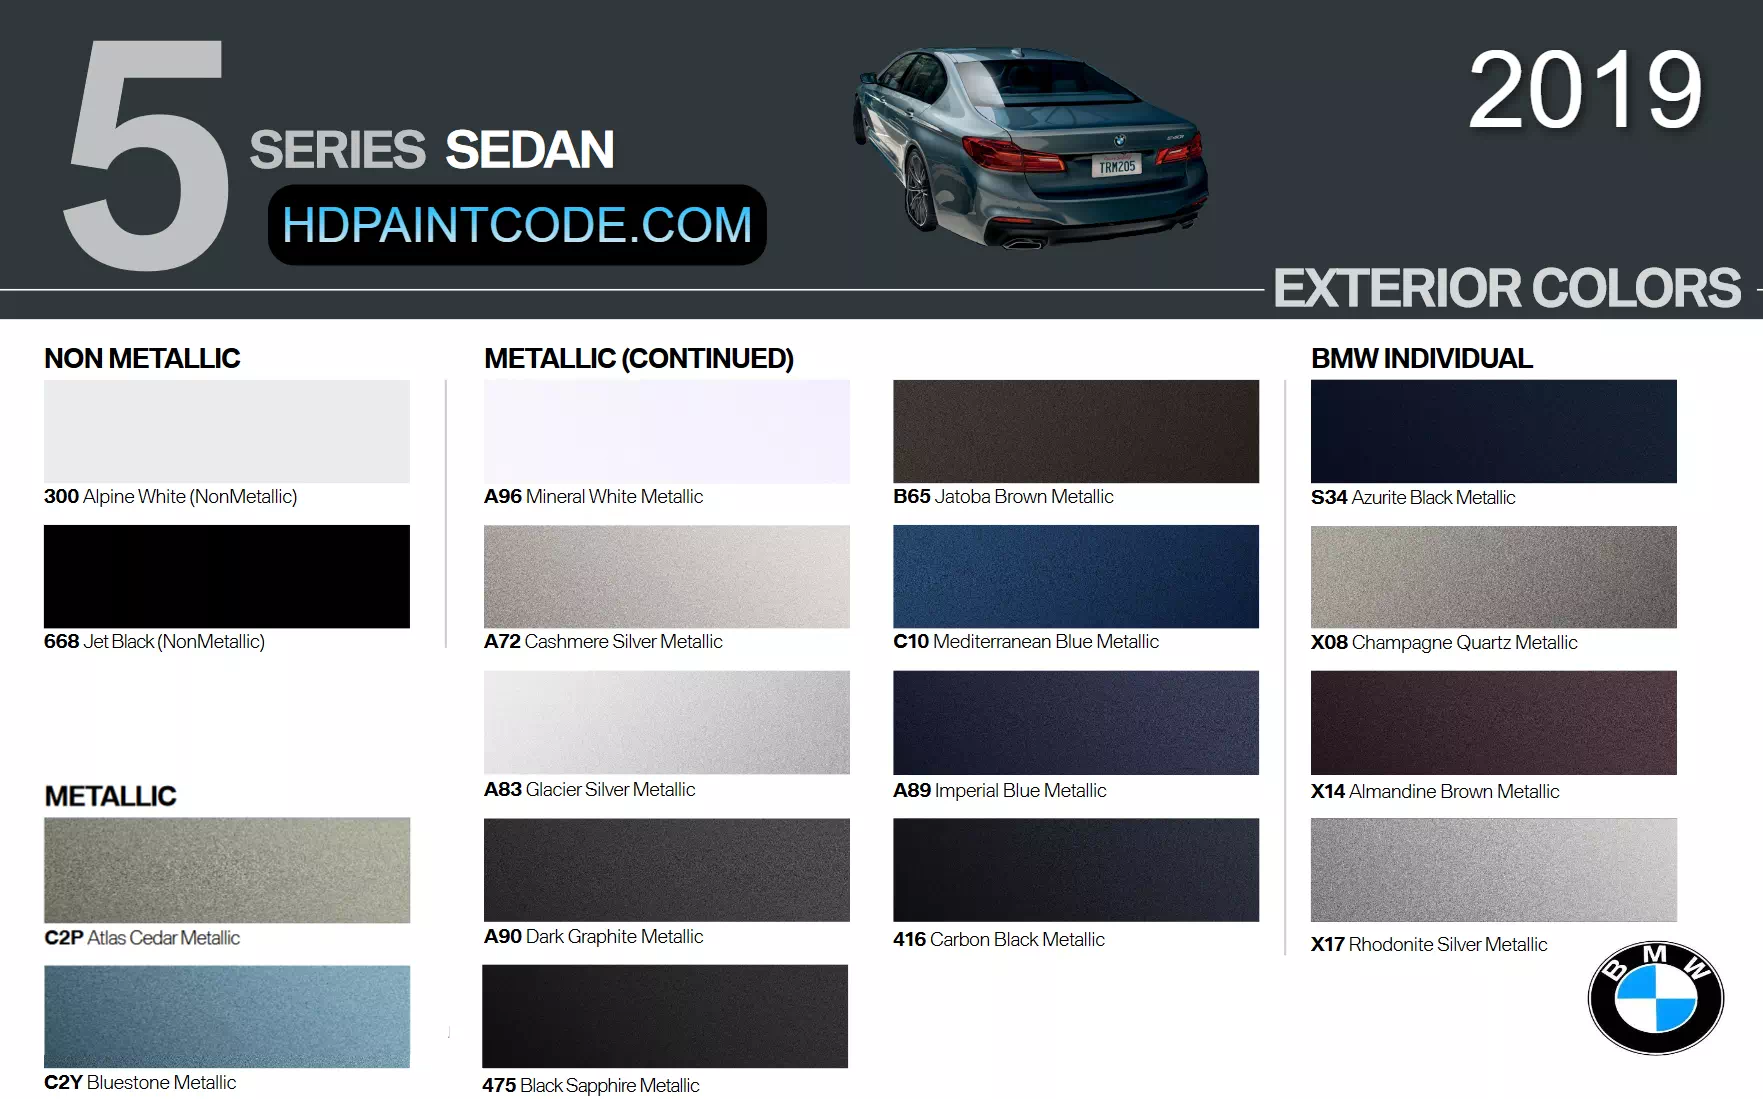 PAINT CODES AND EXAMPLES USED ON A 2019 BMW 5 SERIES SEDAN